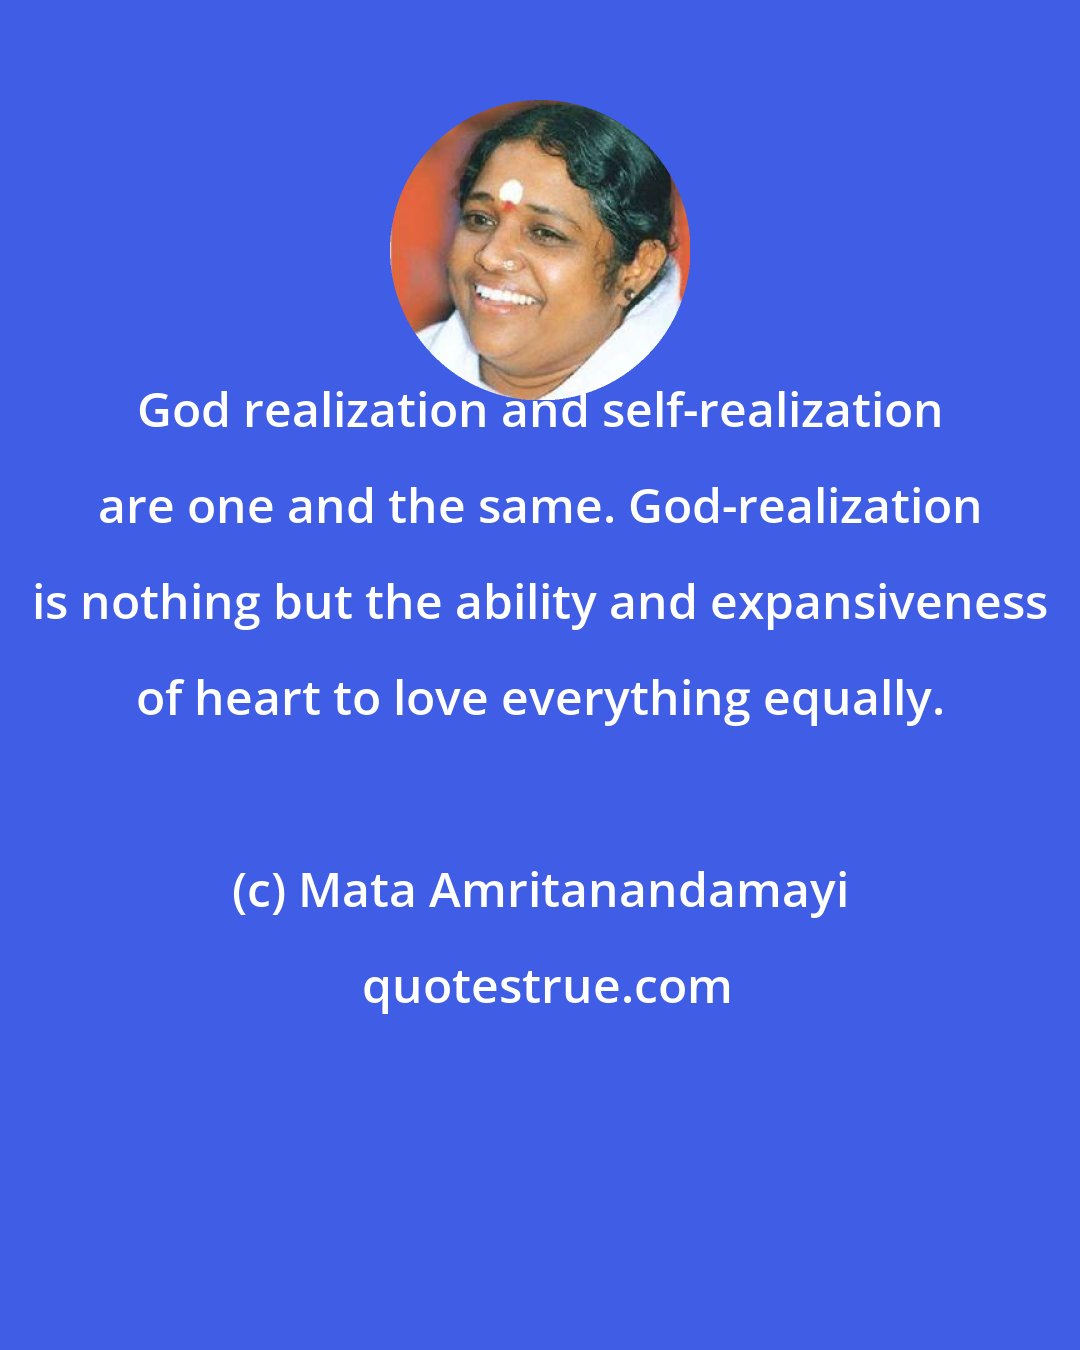 Mata Amritanandamayi: God realization and self-realization are one and the same. God-realization is nothing but the ability and expansiveness of heart to love everything equally.